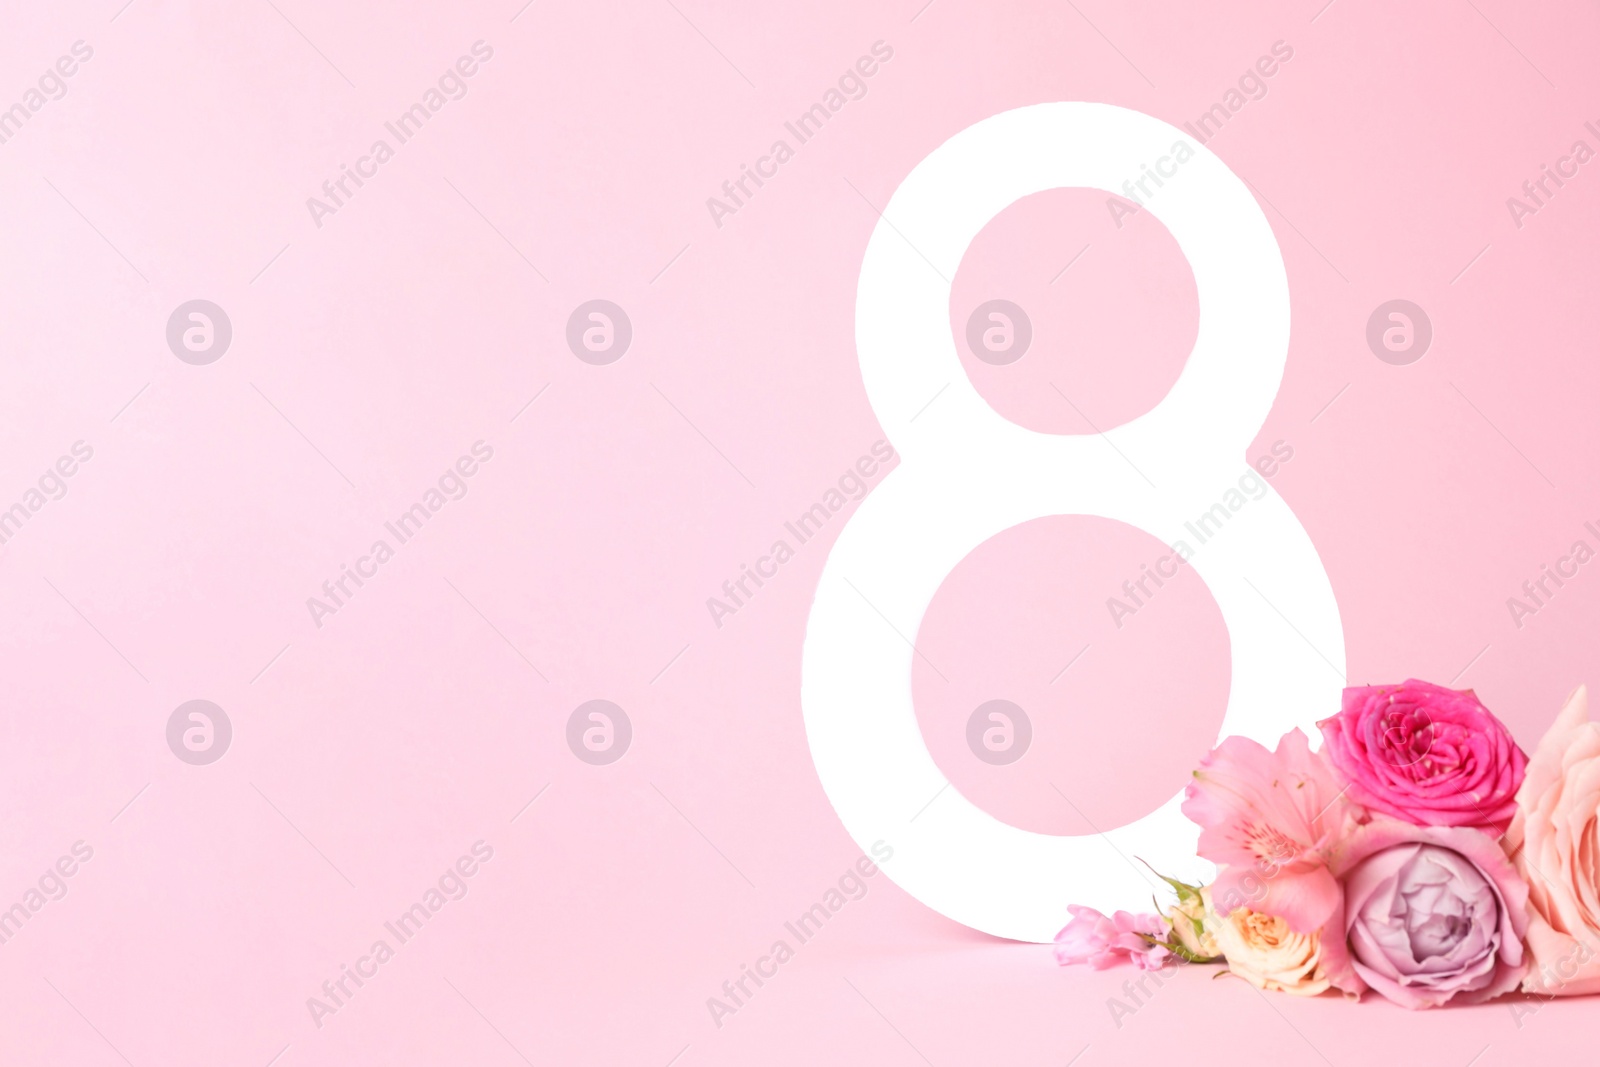 Photo of 8 March greeting card design with beautiful flowers on light pink background. Space for text